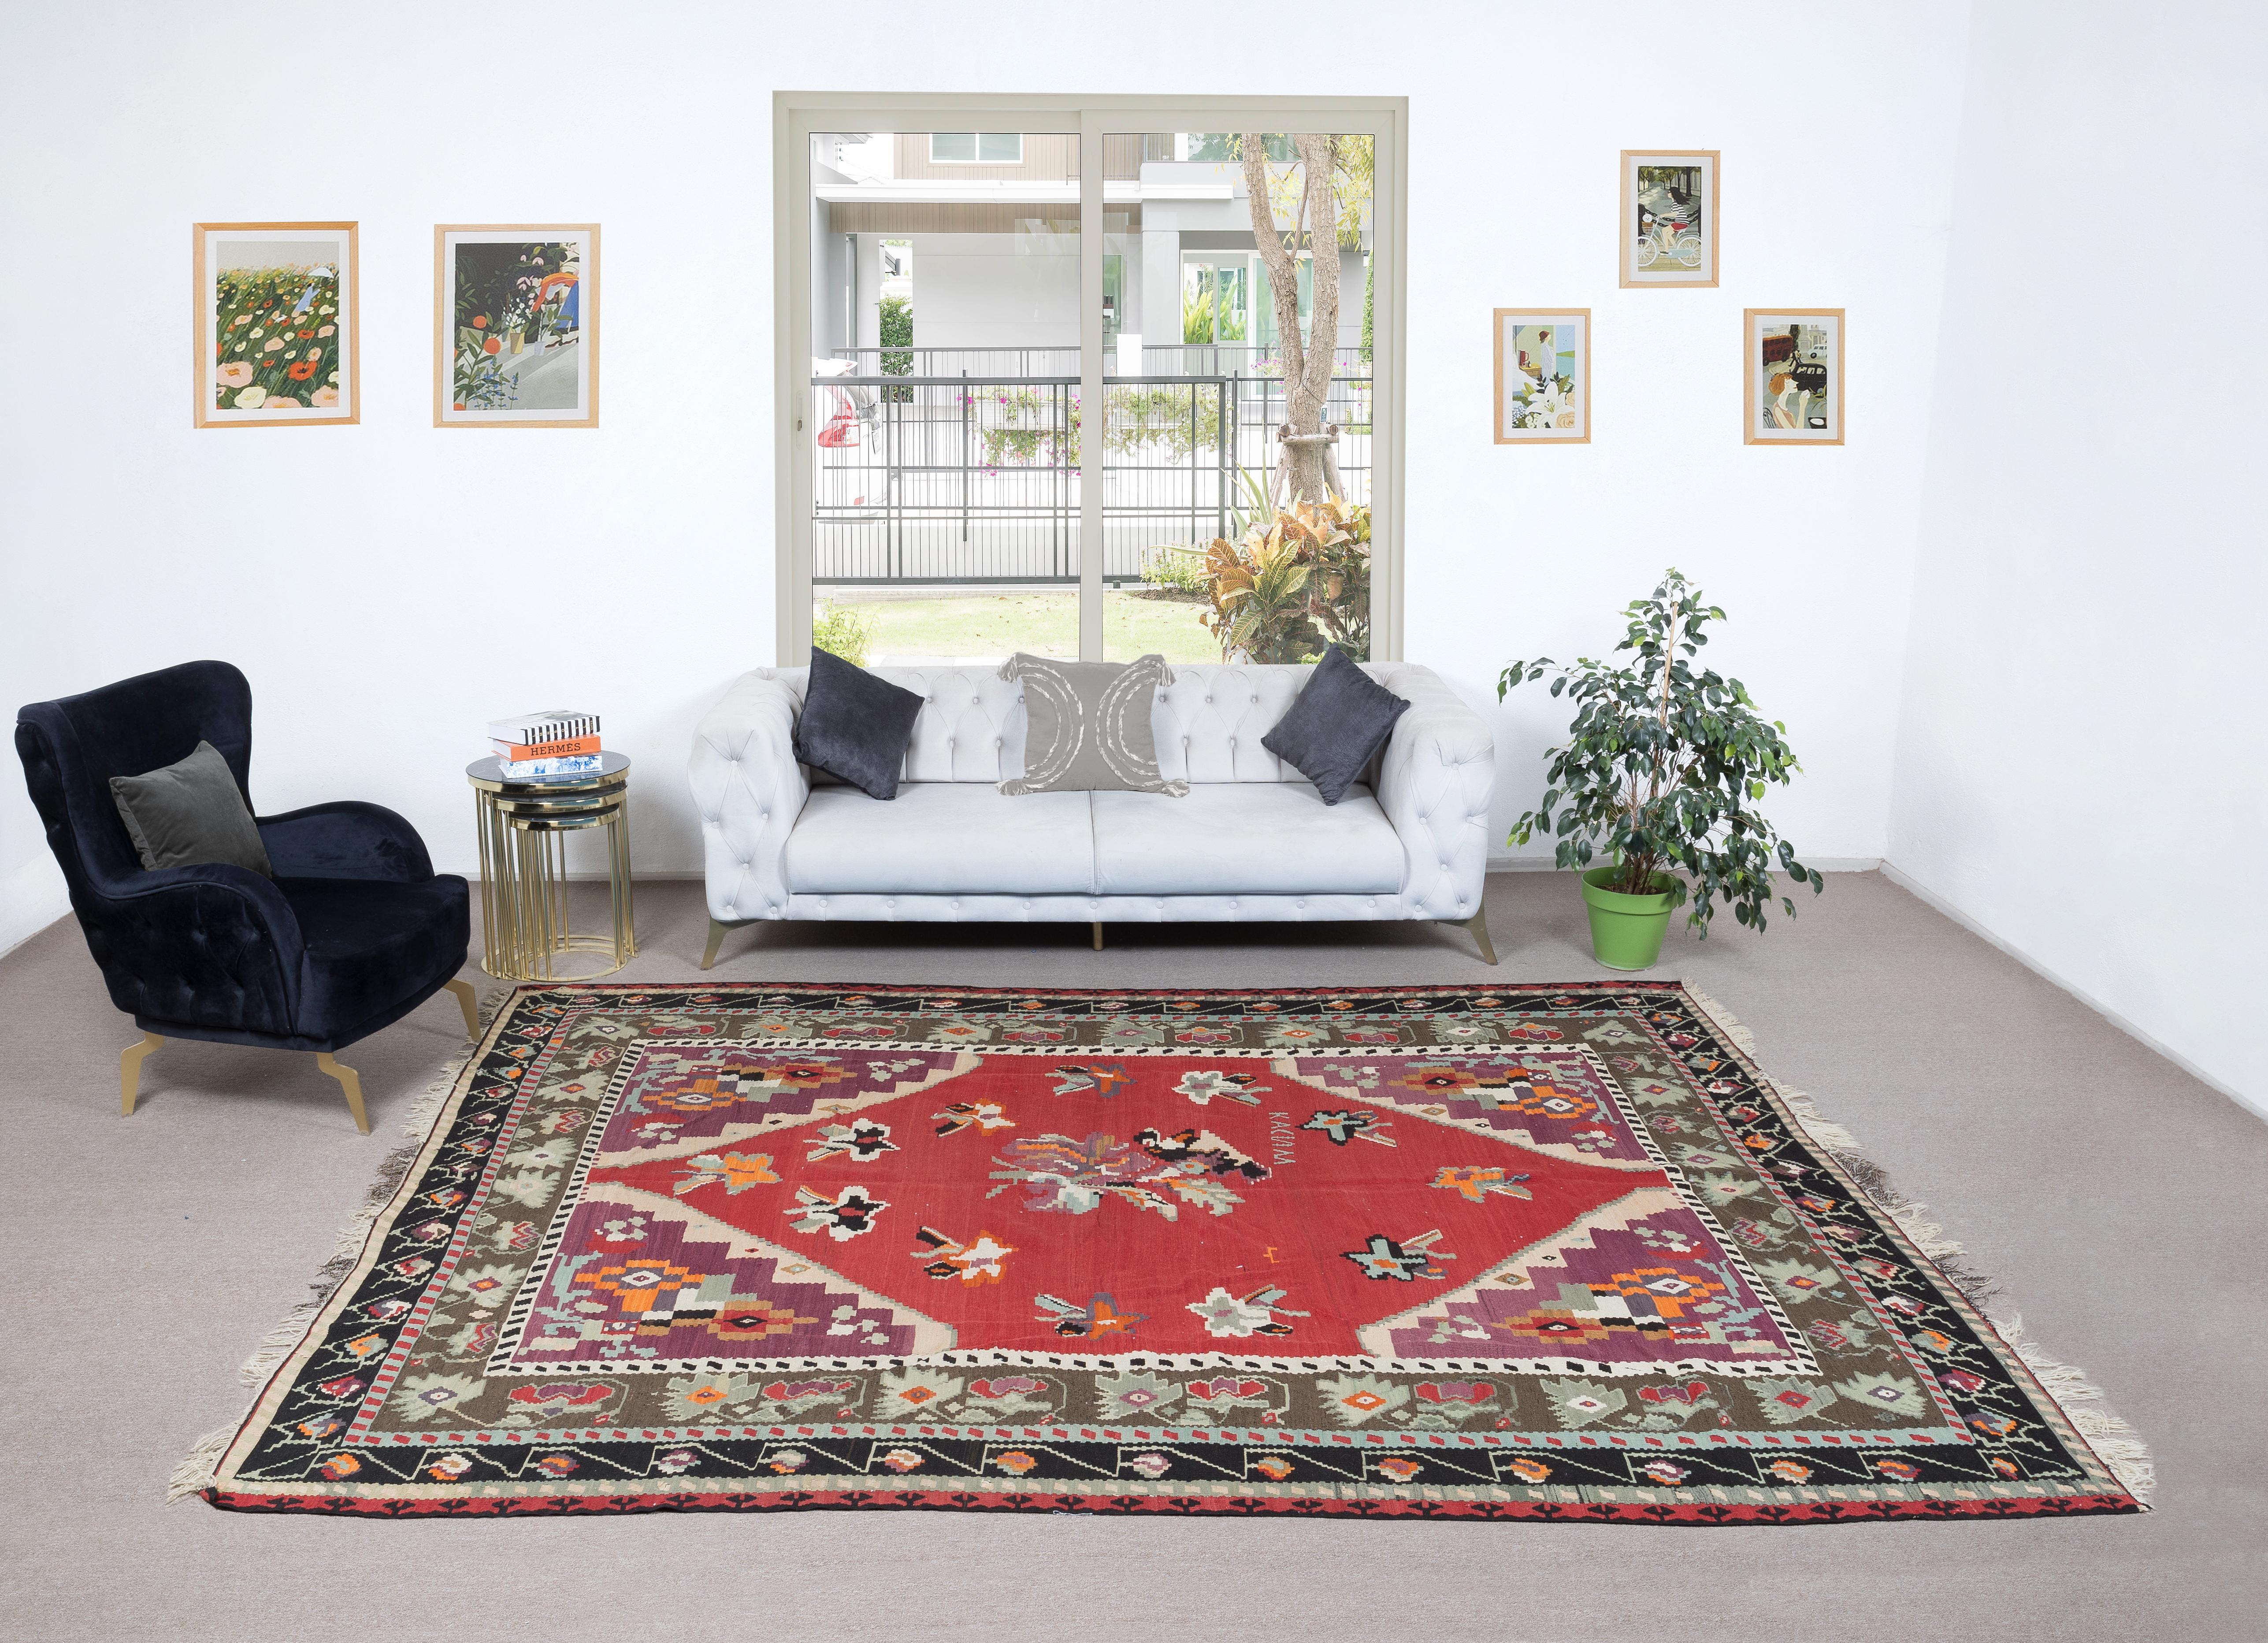 Enrich your living space with the rustic charm and timeless elegance of this vintage Bosnian flat-weave wool kilim. Crafted with skill and care by Bosnian artisans, this kilim is a testament to the rich cultural heritage and traditional